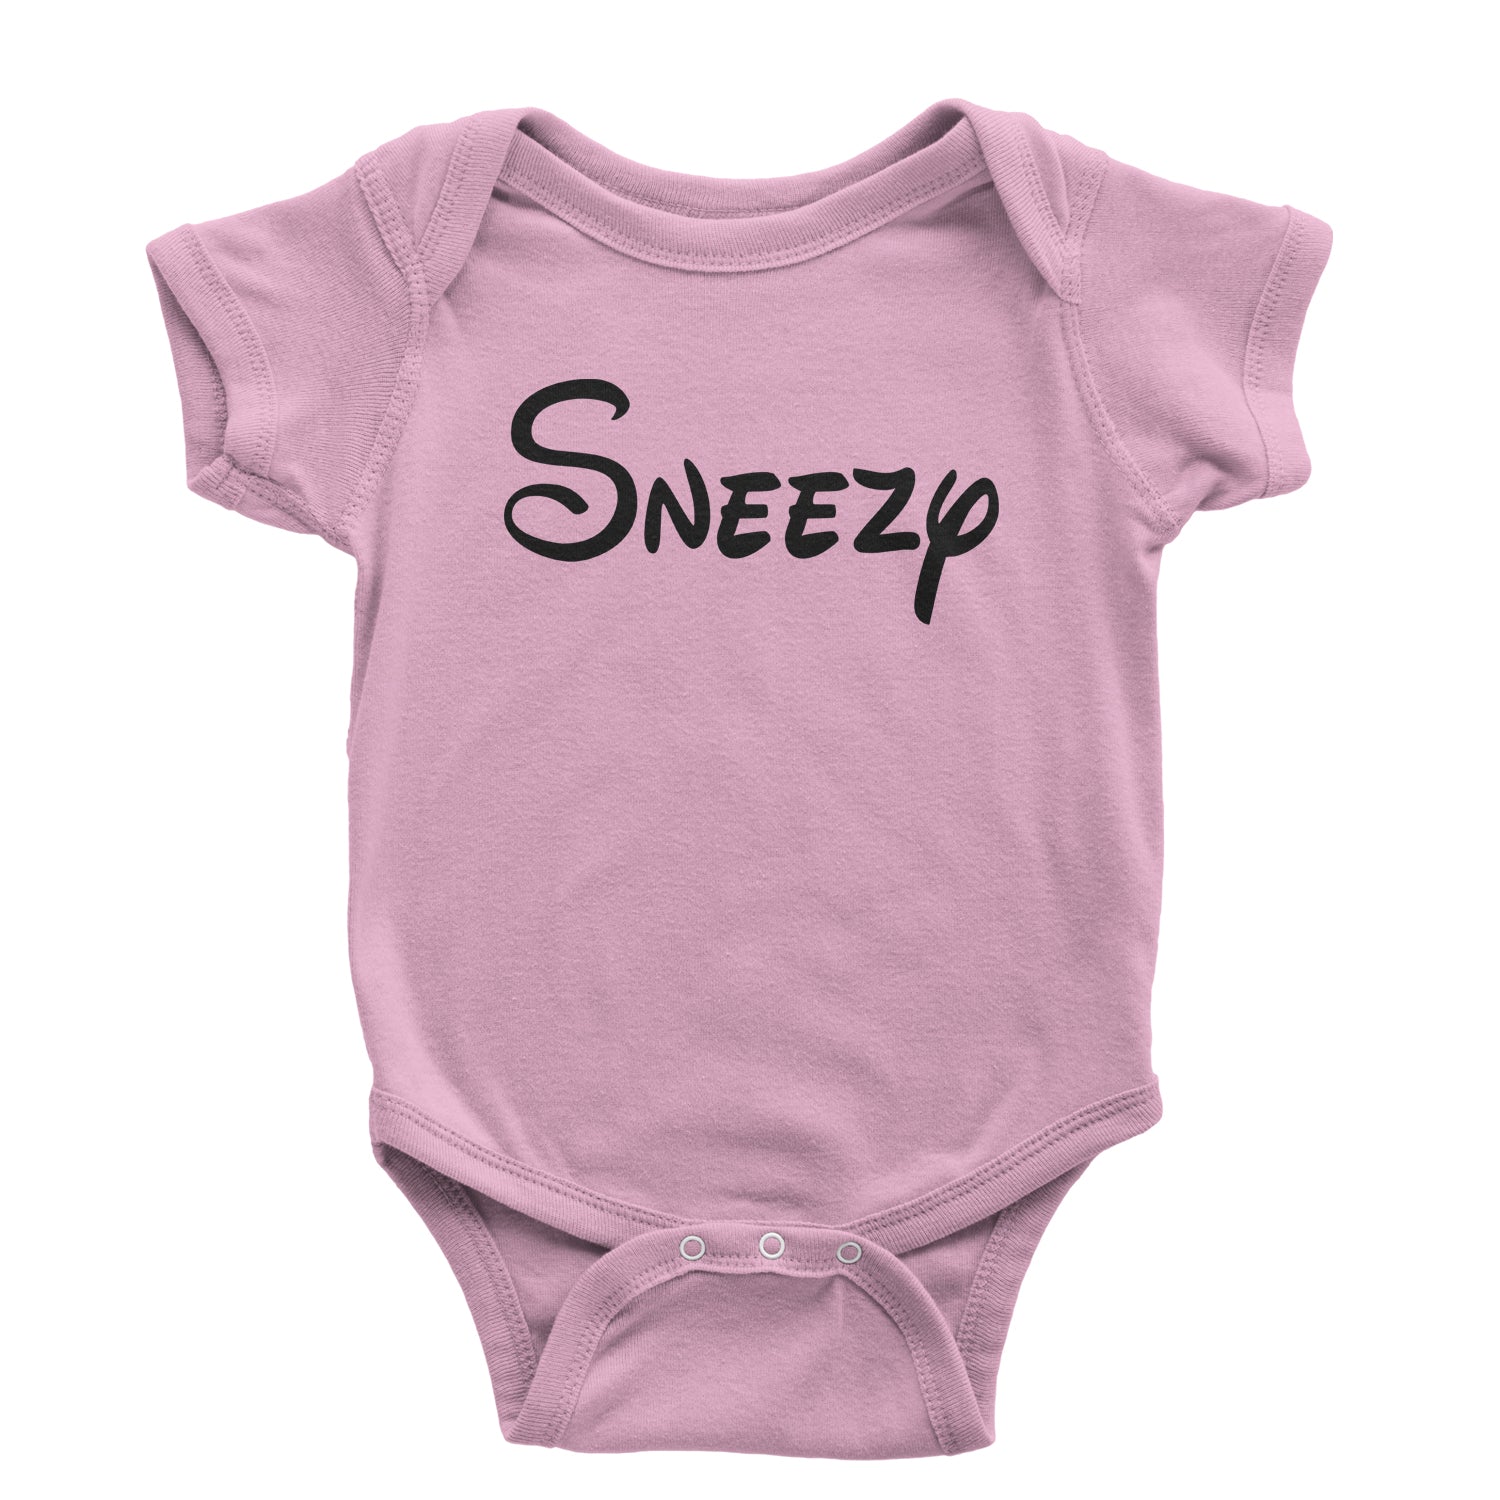 Sneezy - 7 Dwarfs Costume Infant One-Piece Romper Bodysuit and, costume, dwarfs, group, halloween, matching, seven, snow, the, white by Expression Tees